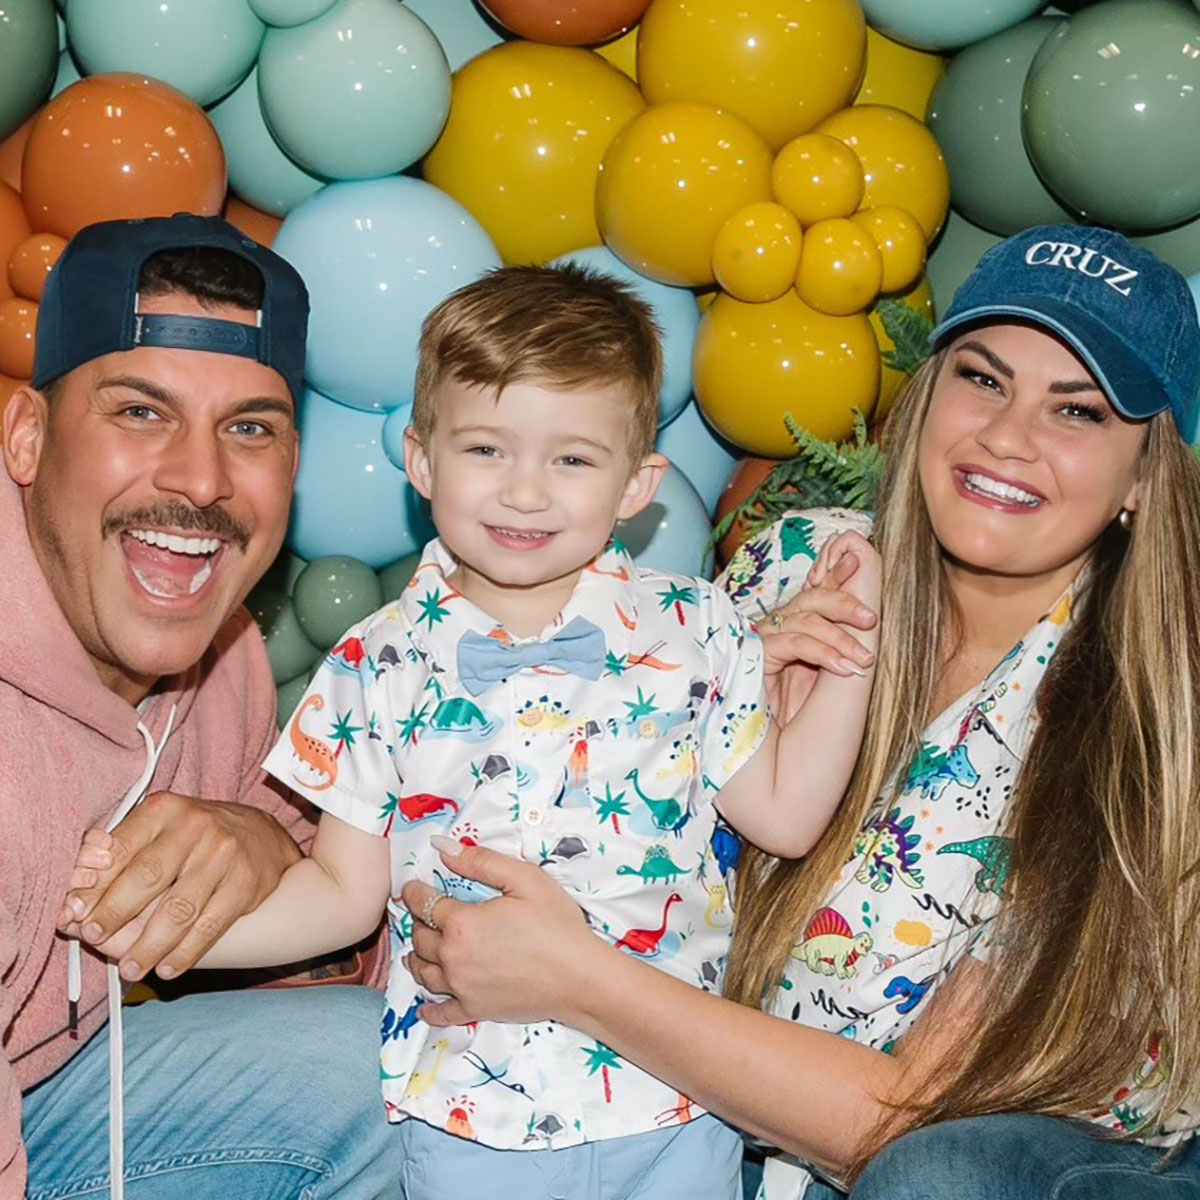 Jax Taylor and Brittany Cartwright Reunite at Their Son Cruz's 3rd Birthday Party Amid Separation